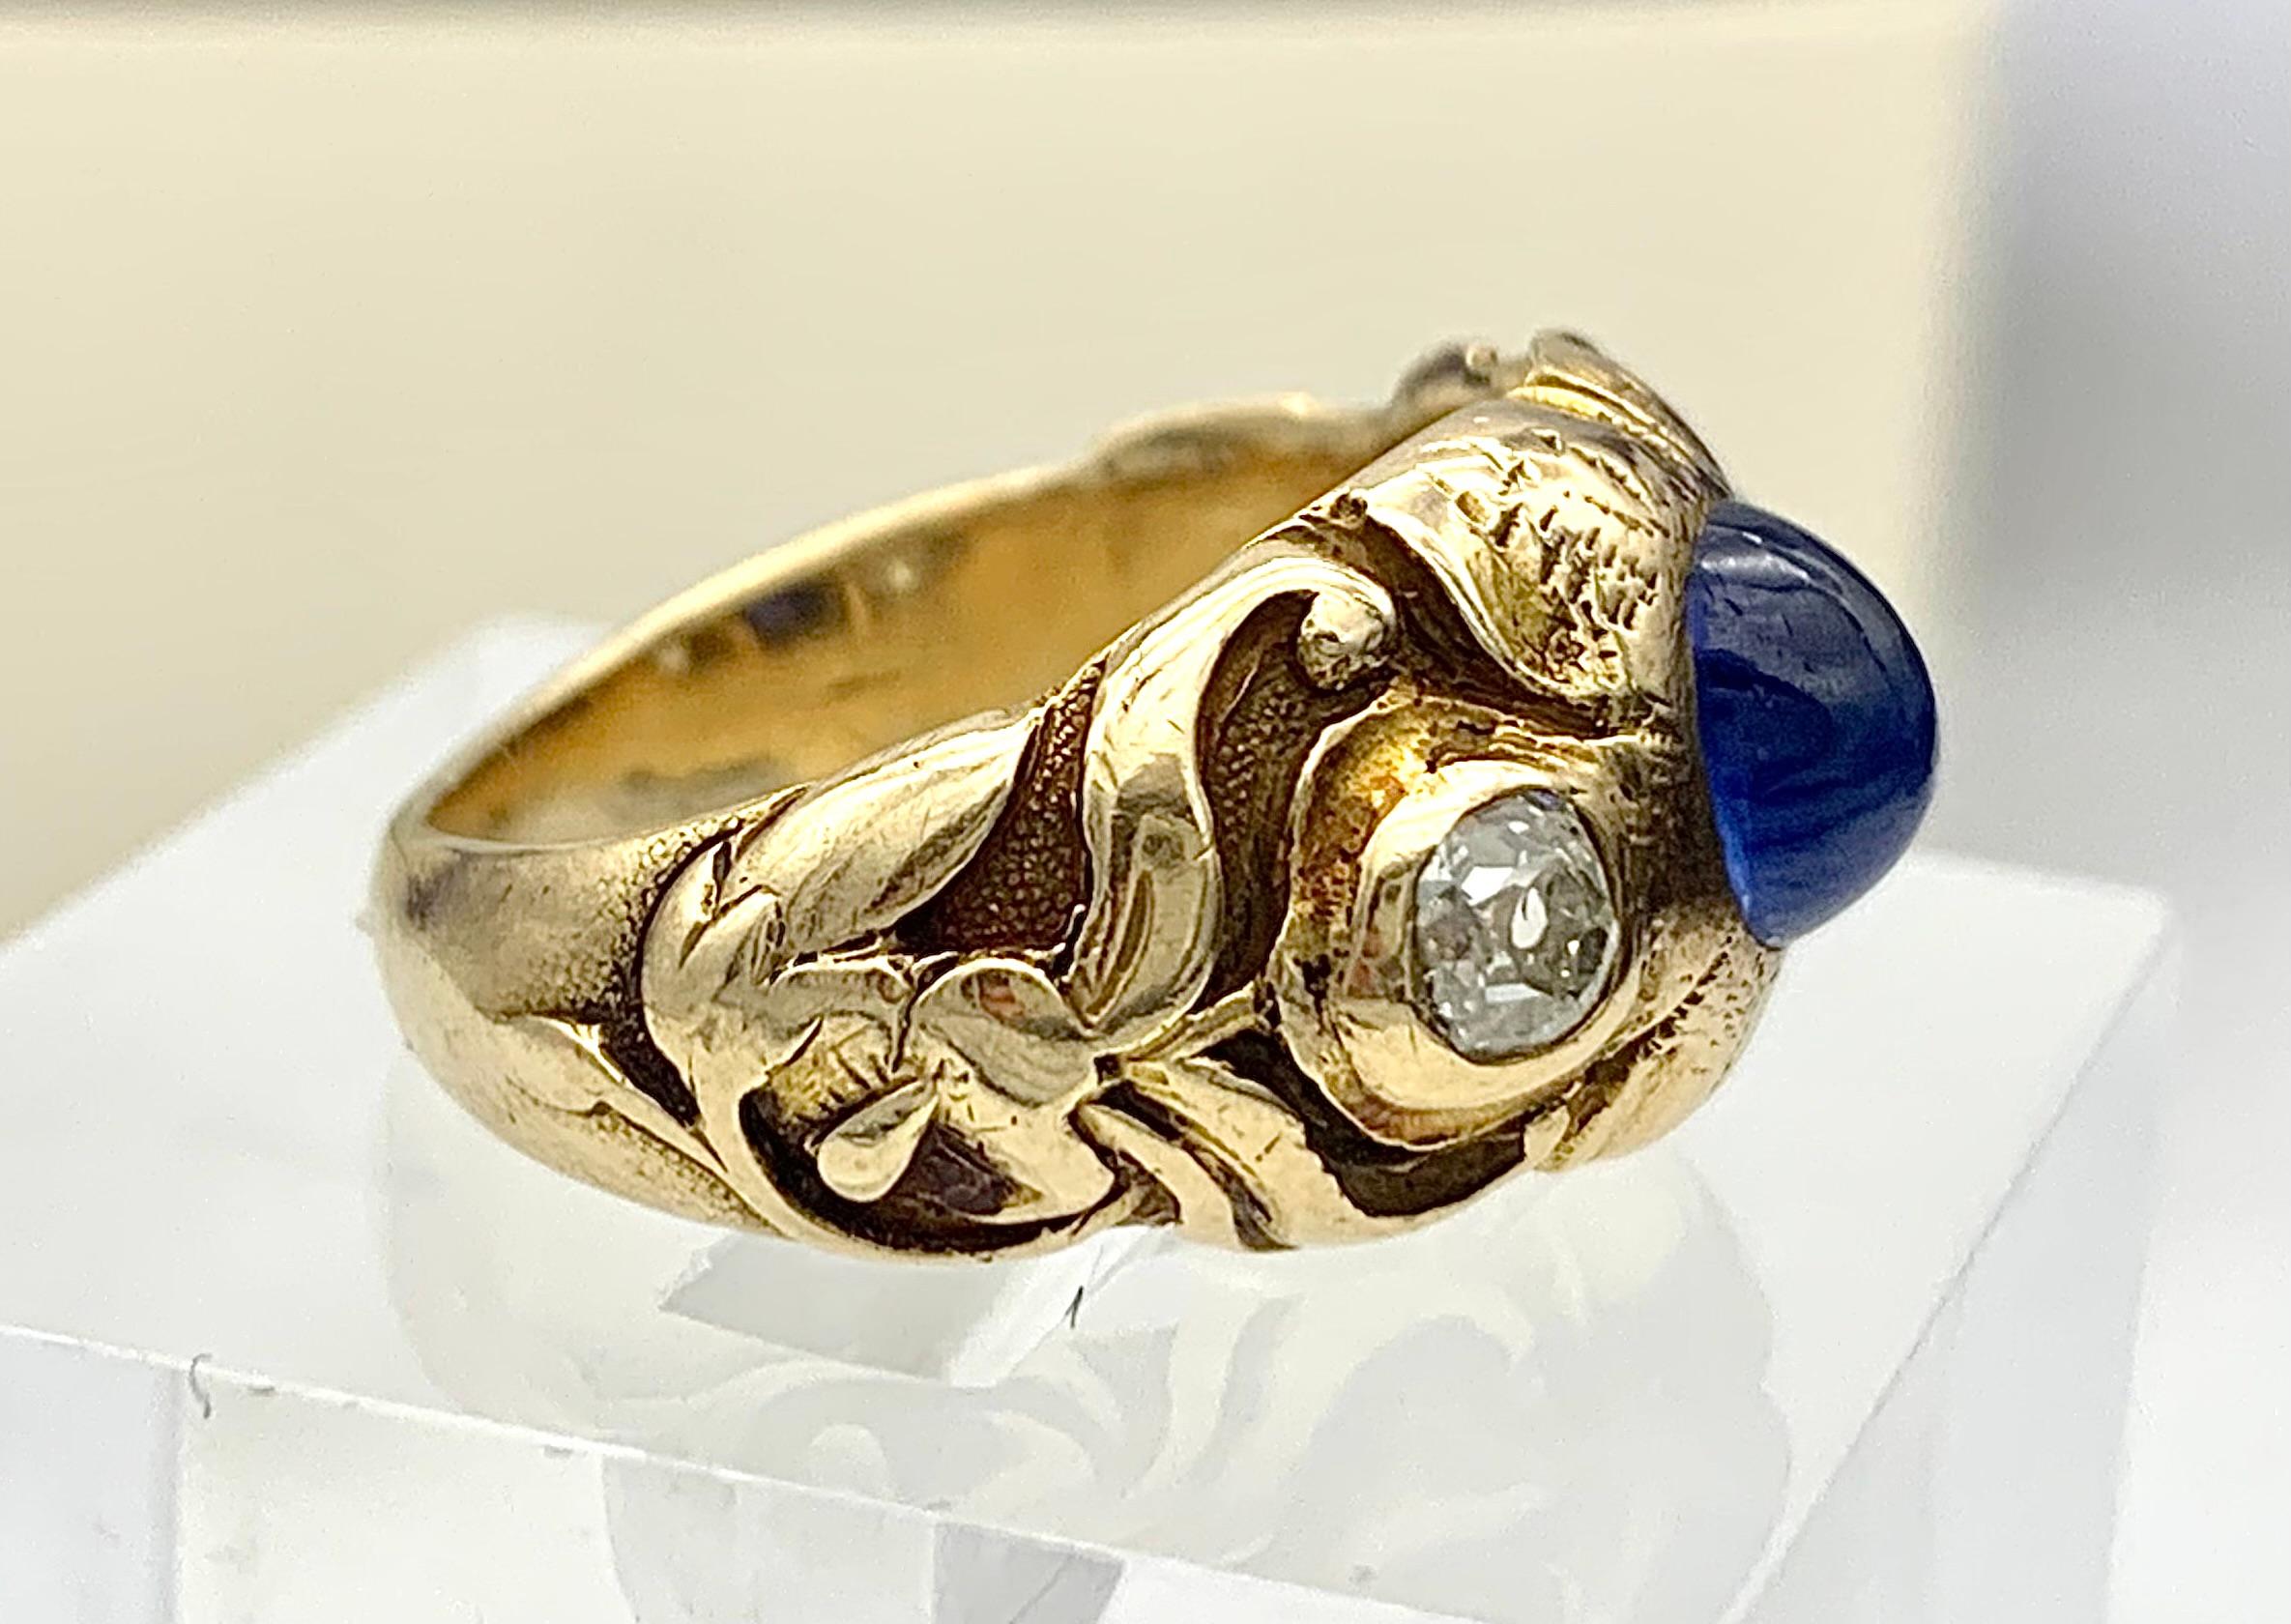 This solid Art Nouveau ring was made in the last decade of the 19th century, in 1895 ca out of 14 carat gold.  The intricate cast has been hand finished, chiseled and engraved. The ring features a flower in its center which is set  with an oval